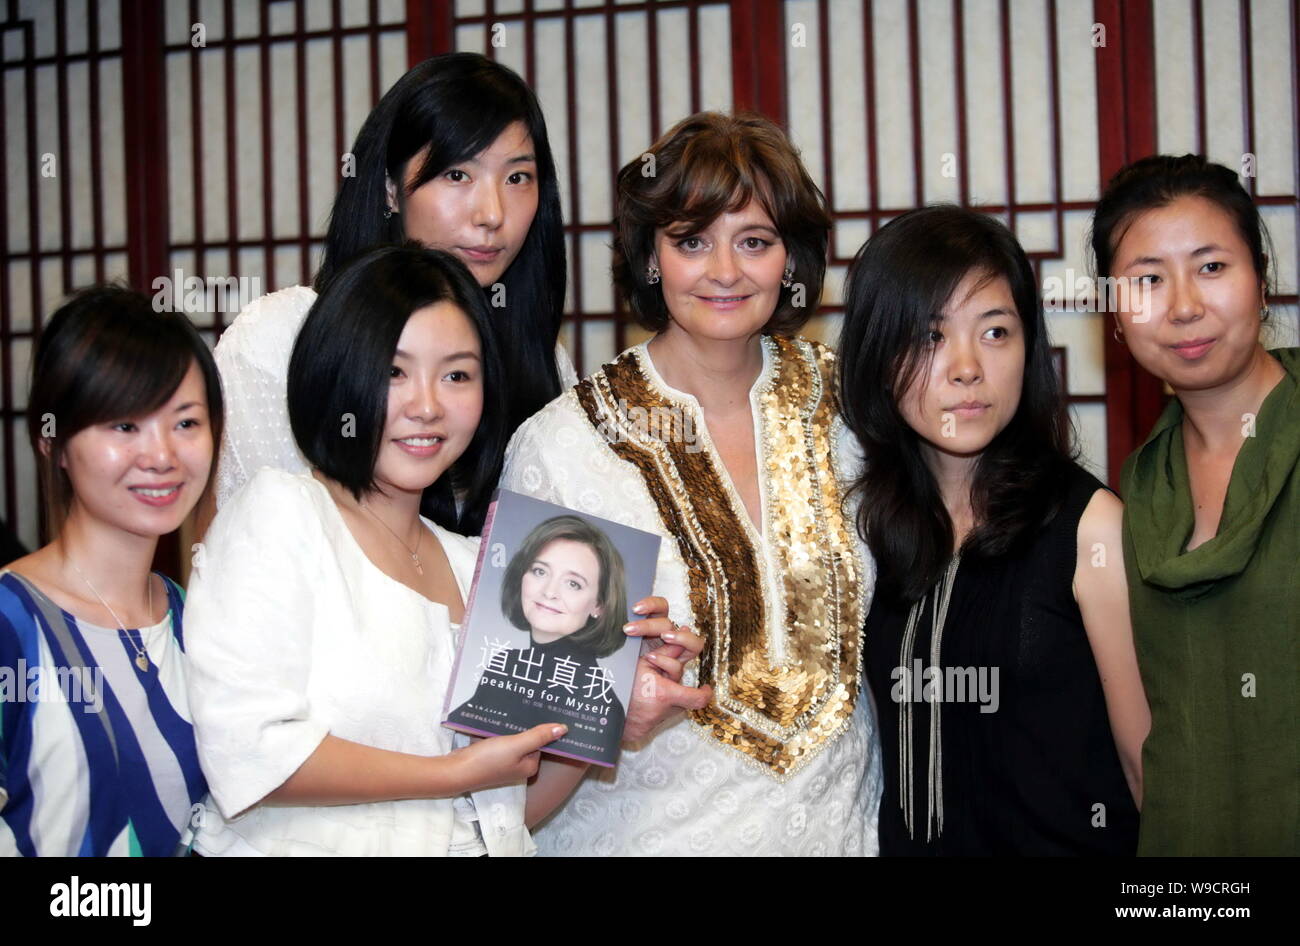 Cherie Blair, third right, wife of former British Prime Minister Tony Blair, poses with Chinese netizens during an event to promote the Chinese versio Stock Photo